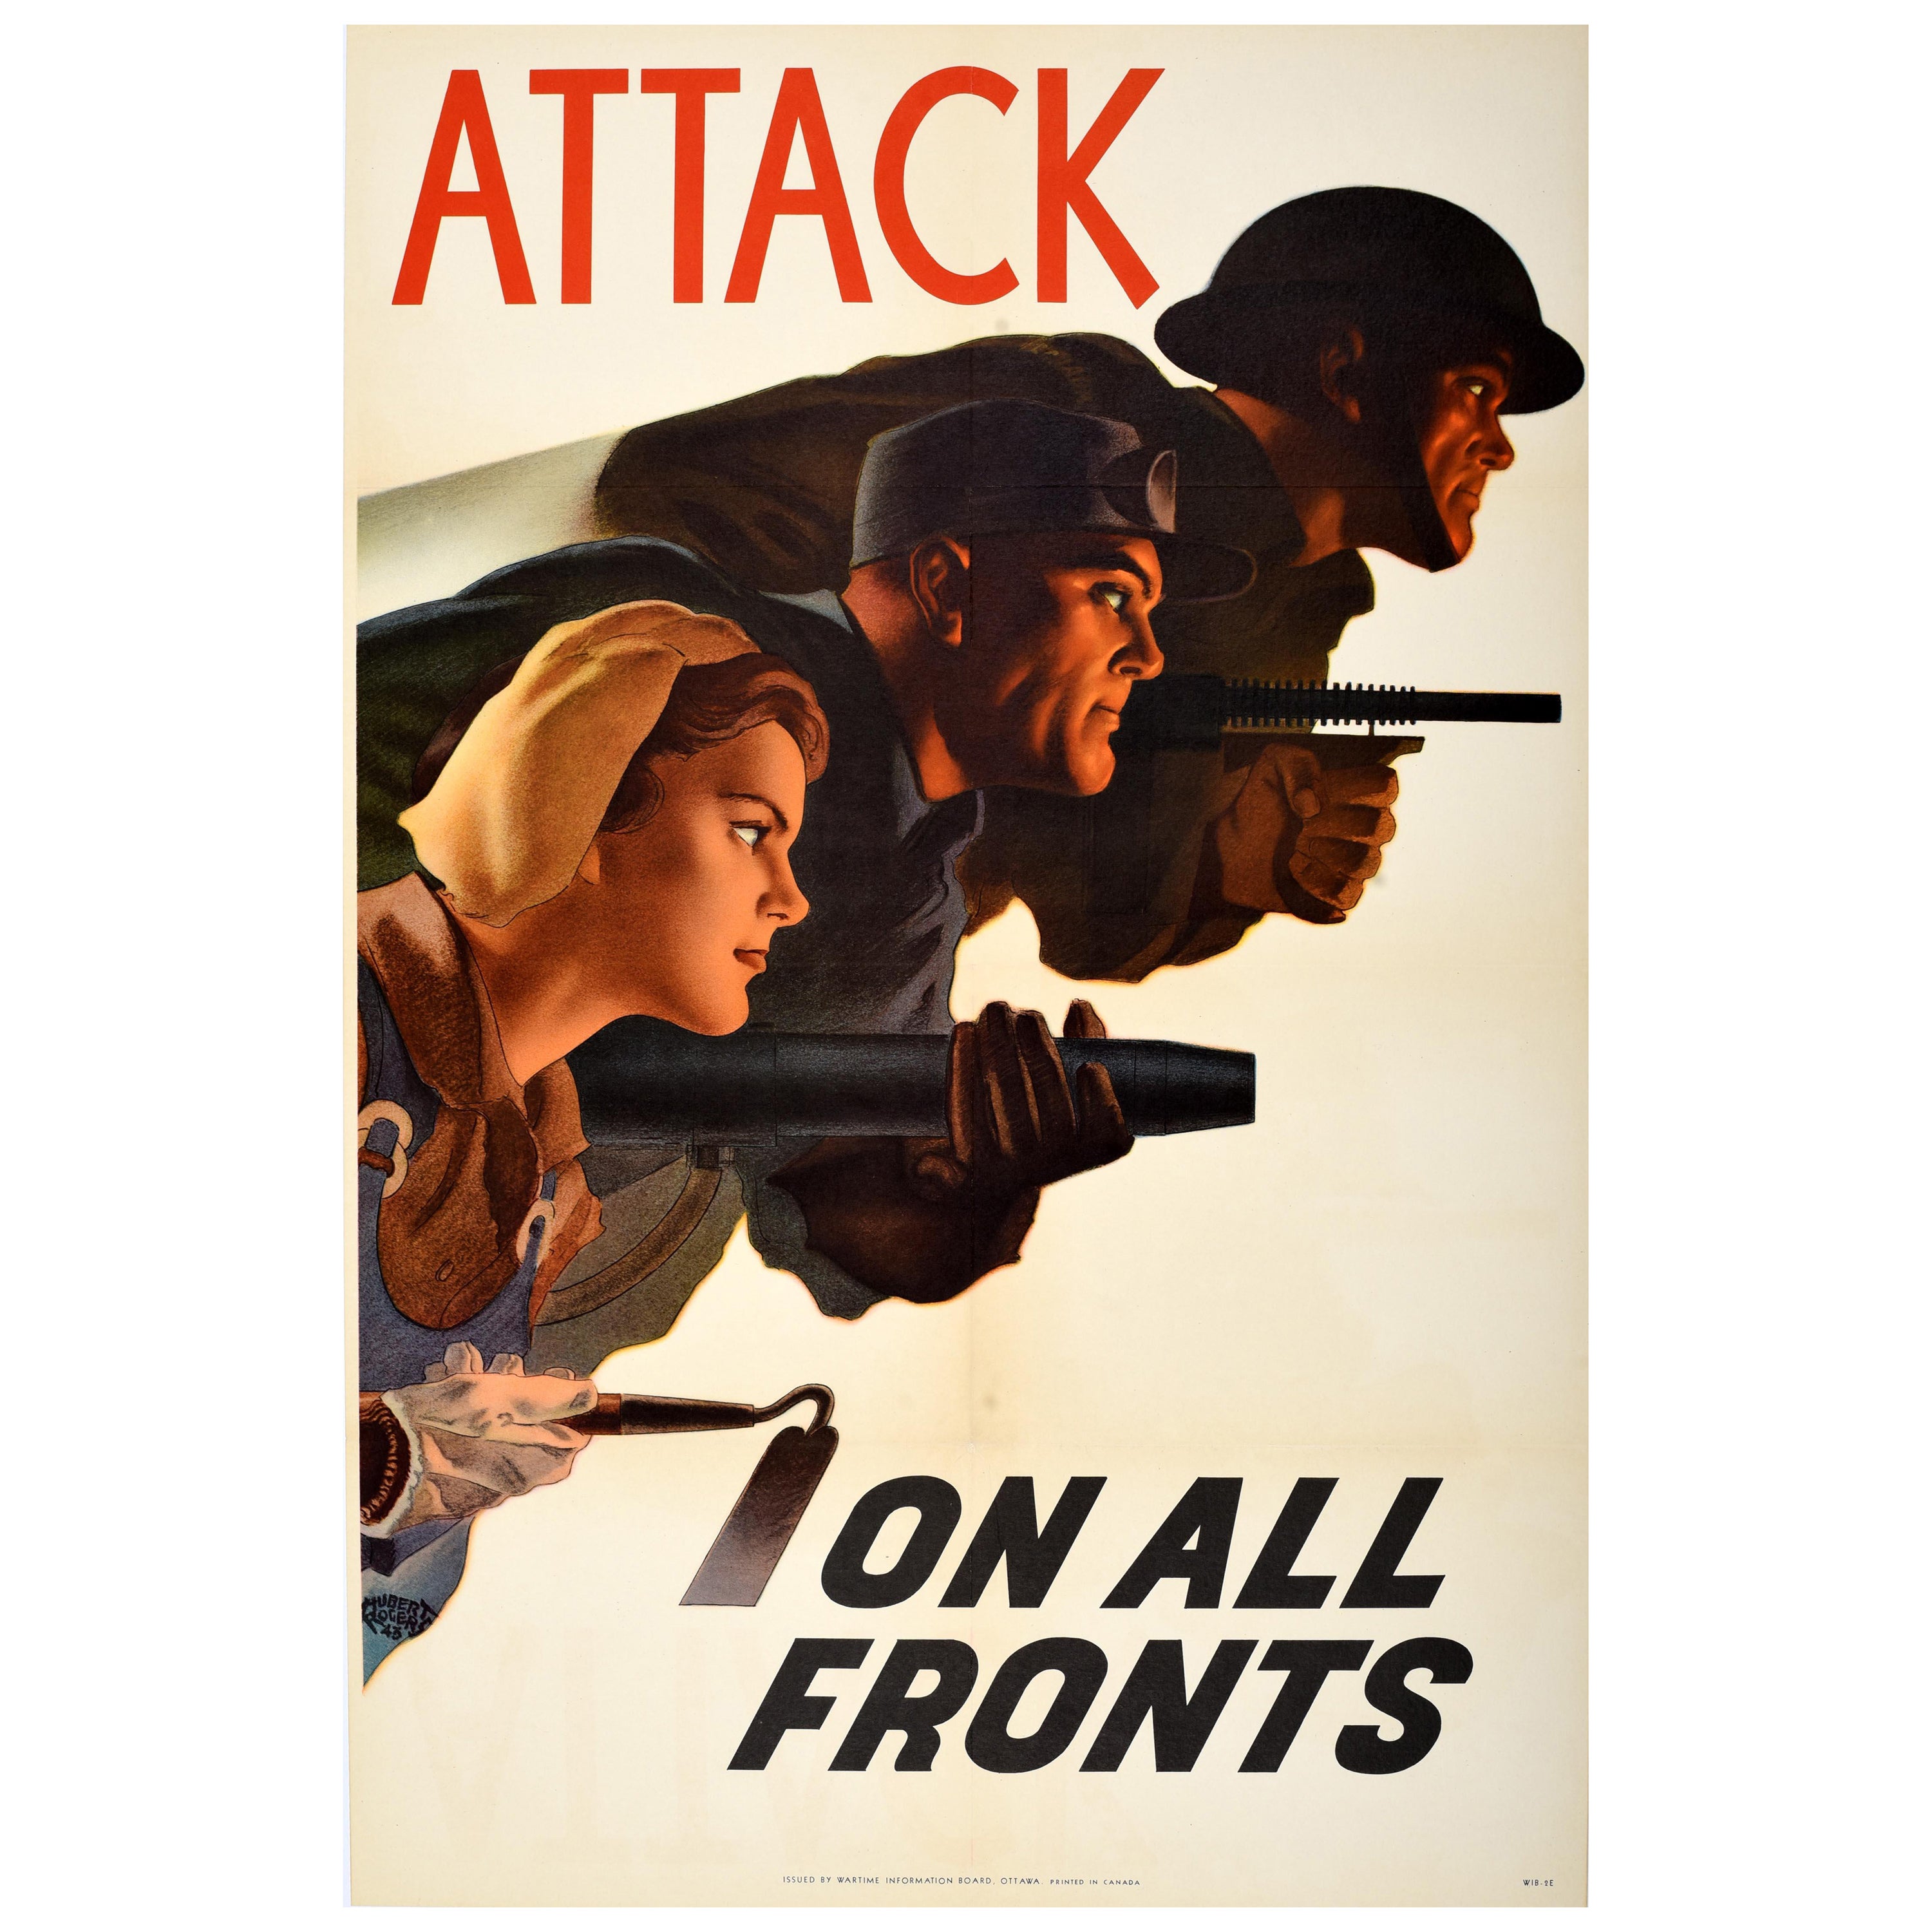 Original Vintage War Poster Attack On All Fronts WWII Canada Hubert Rogers For Sale